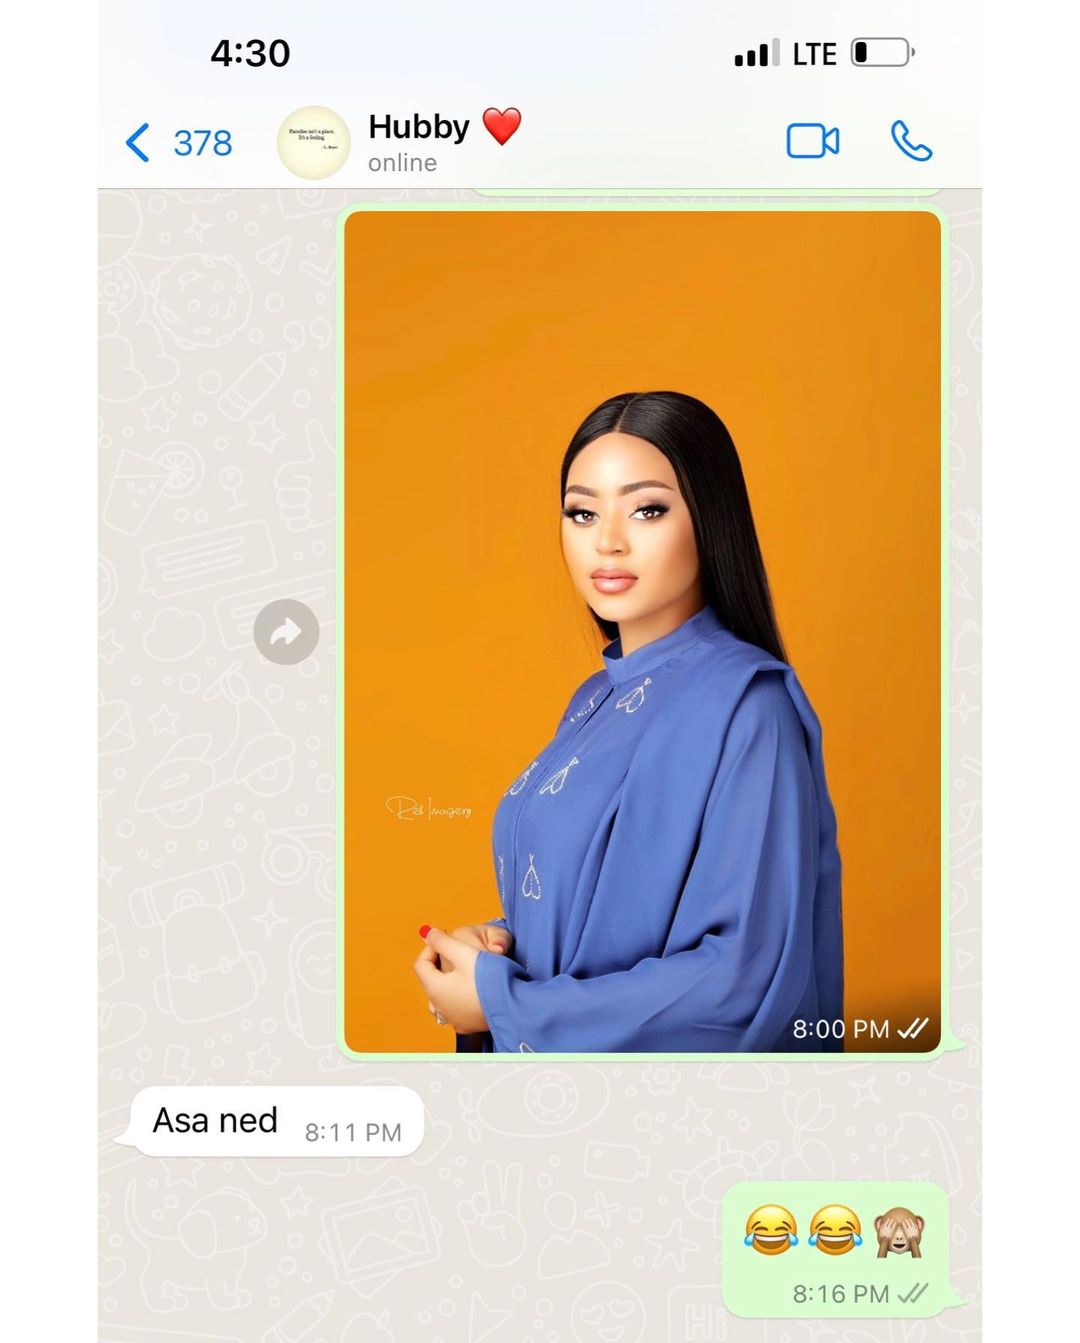 Regina Daniels drops a recent chat she had with her husband, check out the name her husband calls her